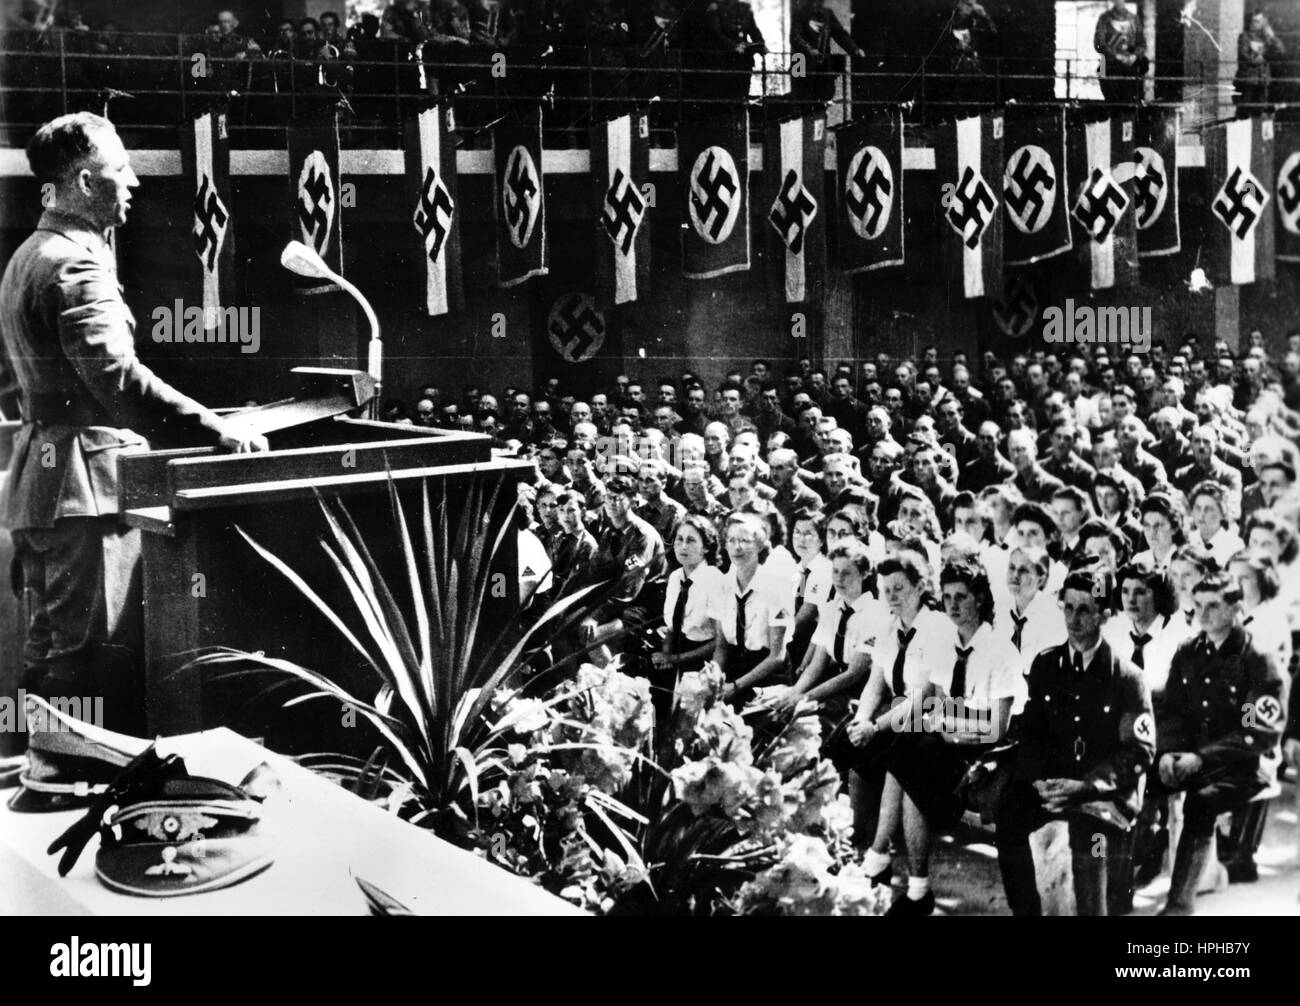 The Nazi propaganda image shows the Chief of Civil Affairs in Luxembourg, Gustav Simon, during his speech to mark the occasion of several specially-selected members of the Luxembourgian Volksdeutsche Bewegung (German People's Movement) being awarded German citizenship in Luxembourg (city). Taken in September 1942. The Nazi propaganda on the reverse of the picture reads, "Luxembourgians become Germans of the Reich. During a major German People's Movement rally, Gustav Simons, Chief of Civil Affairs in Luxembourg, awarded honoured ethnic Germans with German Reich citizenship in front of around 9 Stock Photo